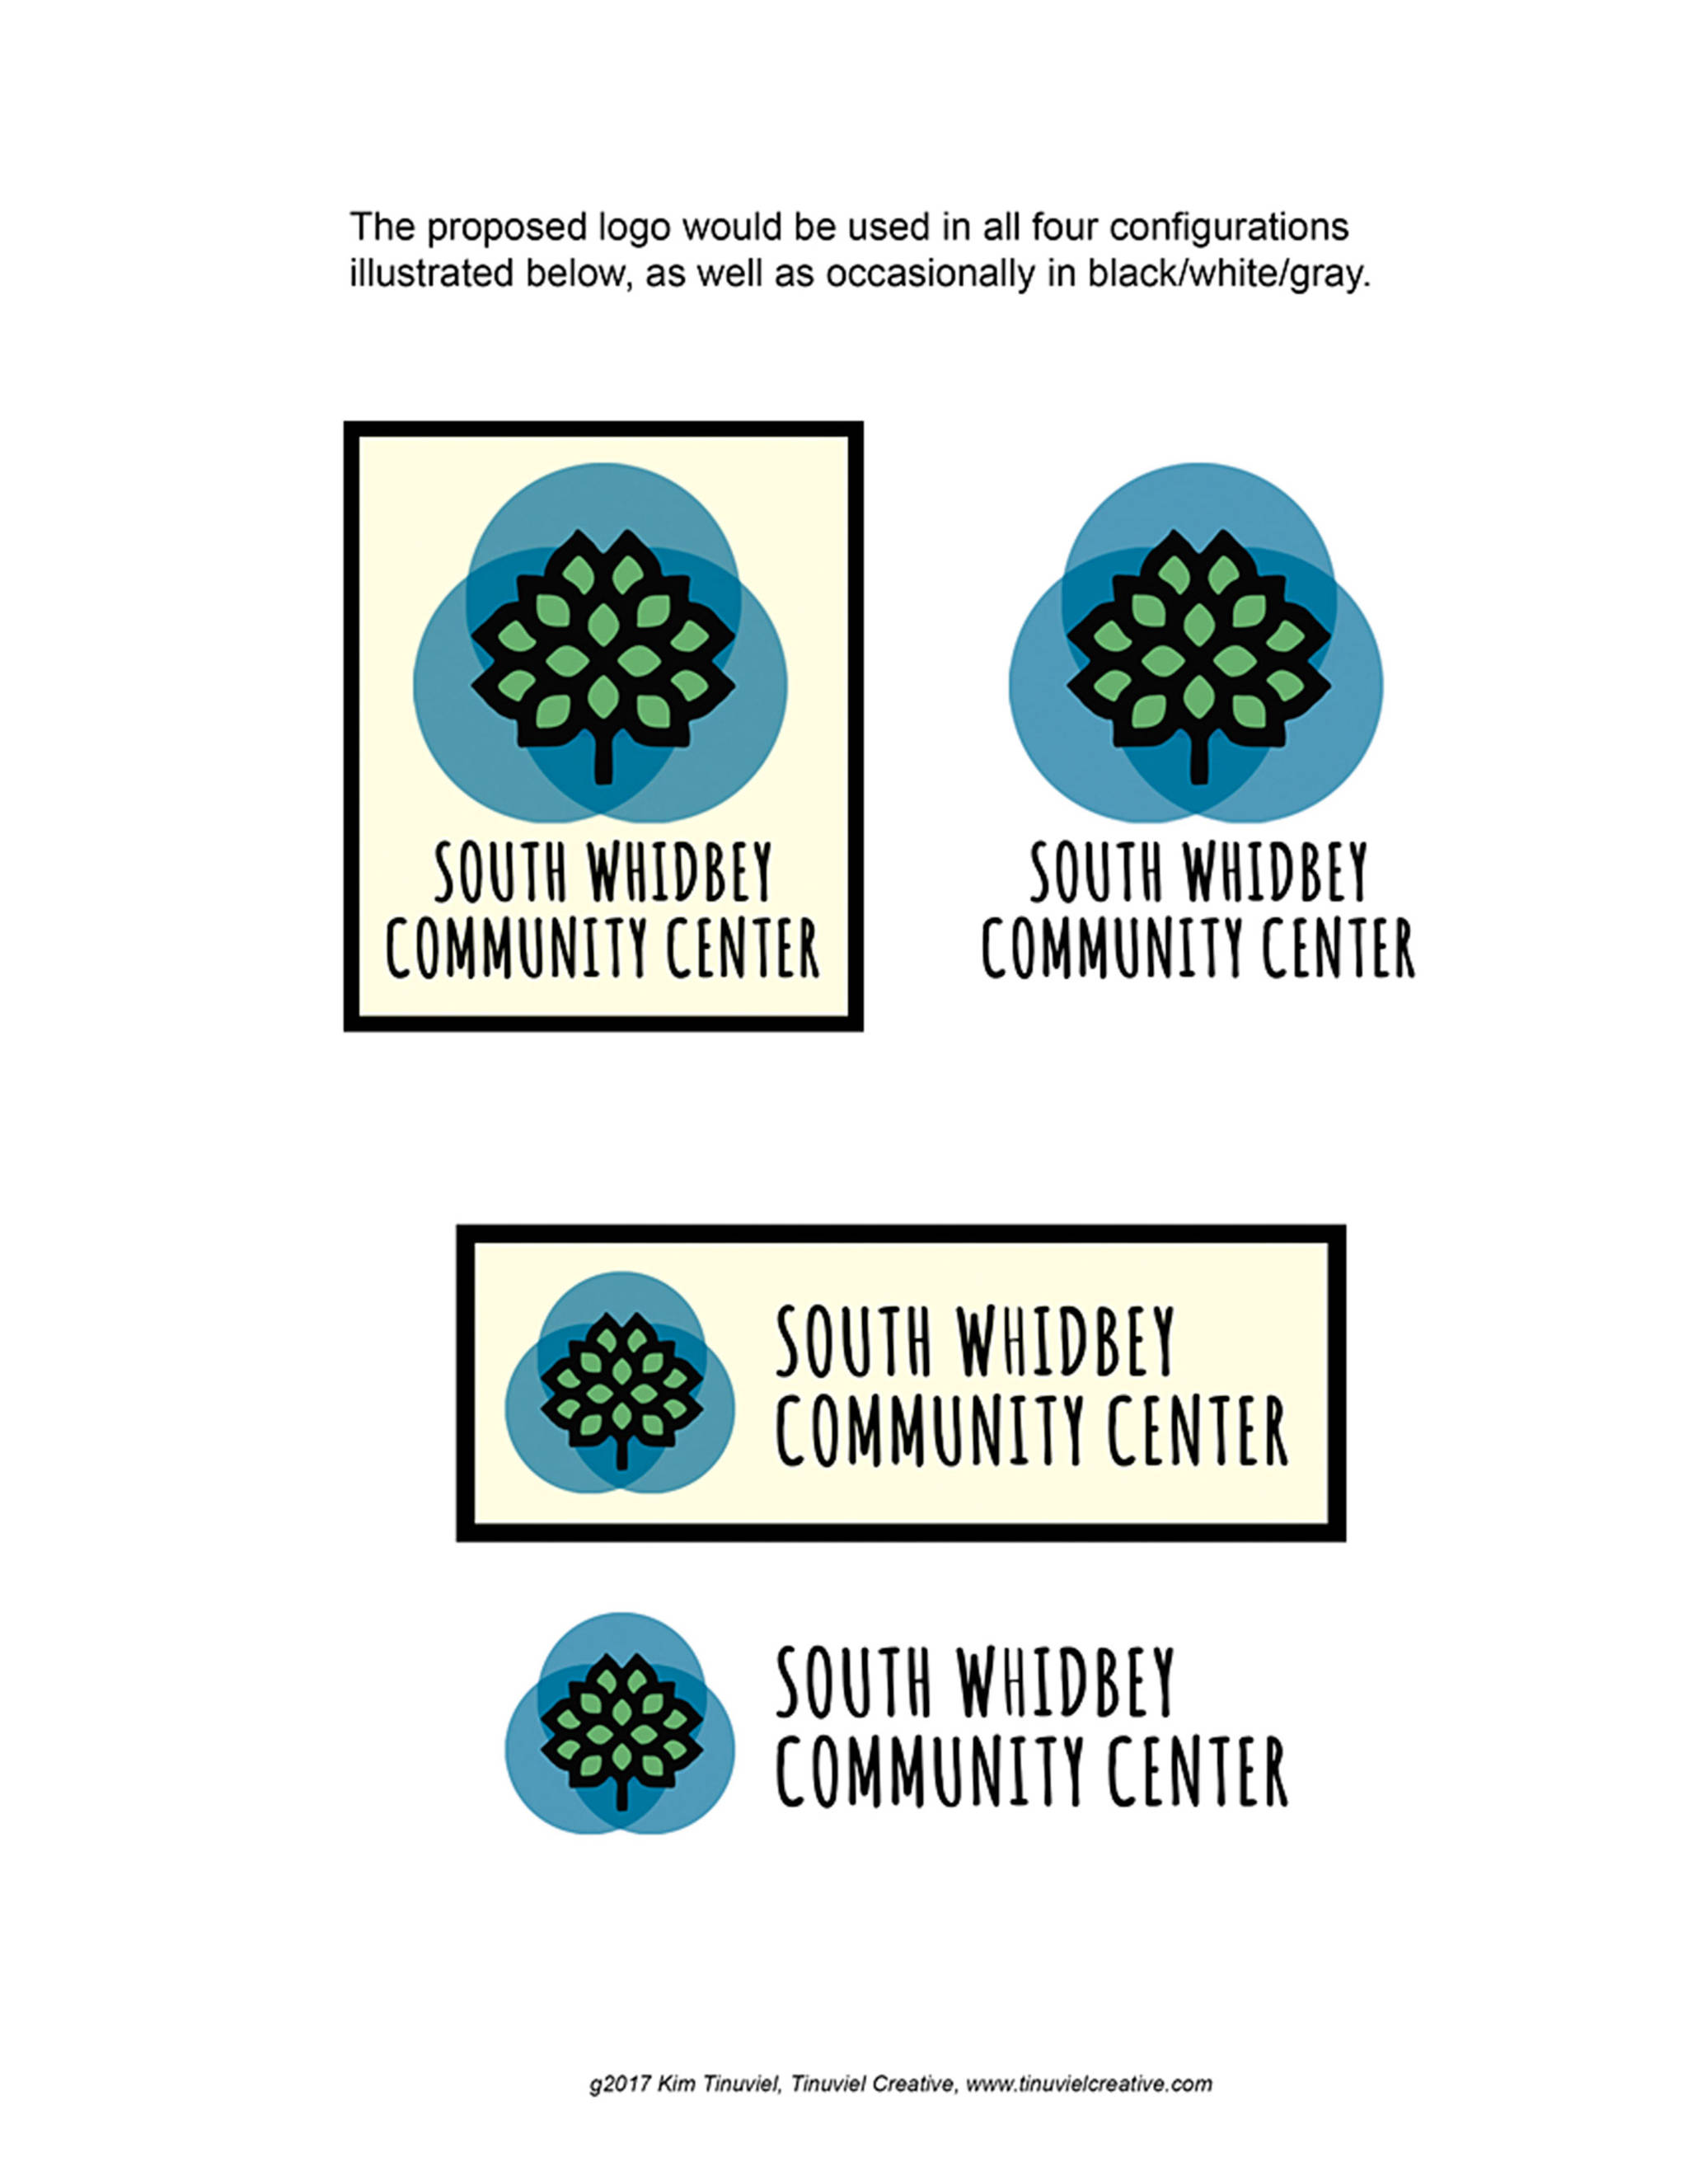 Logo designed for South Whidbey Community Center